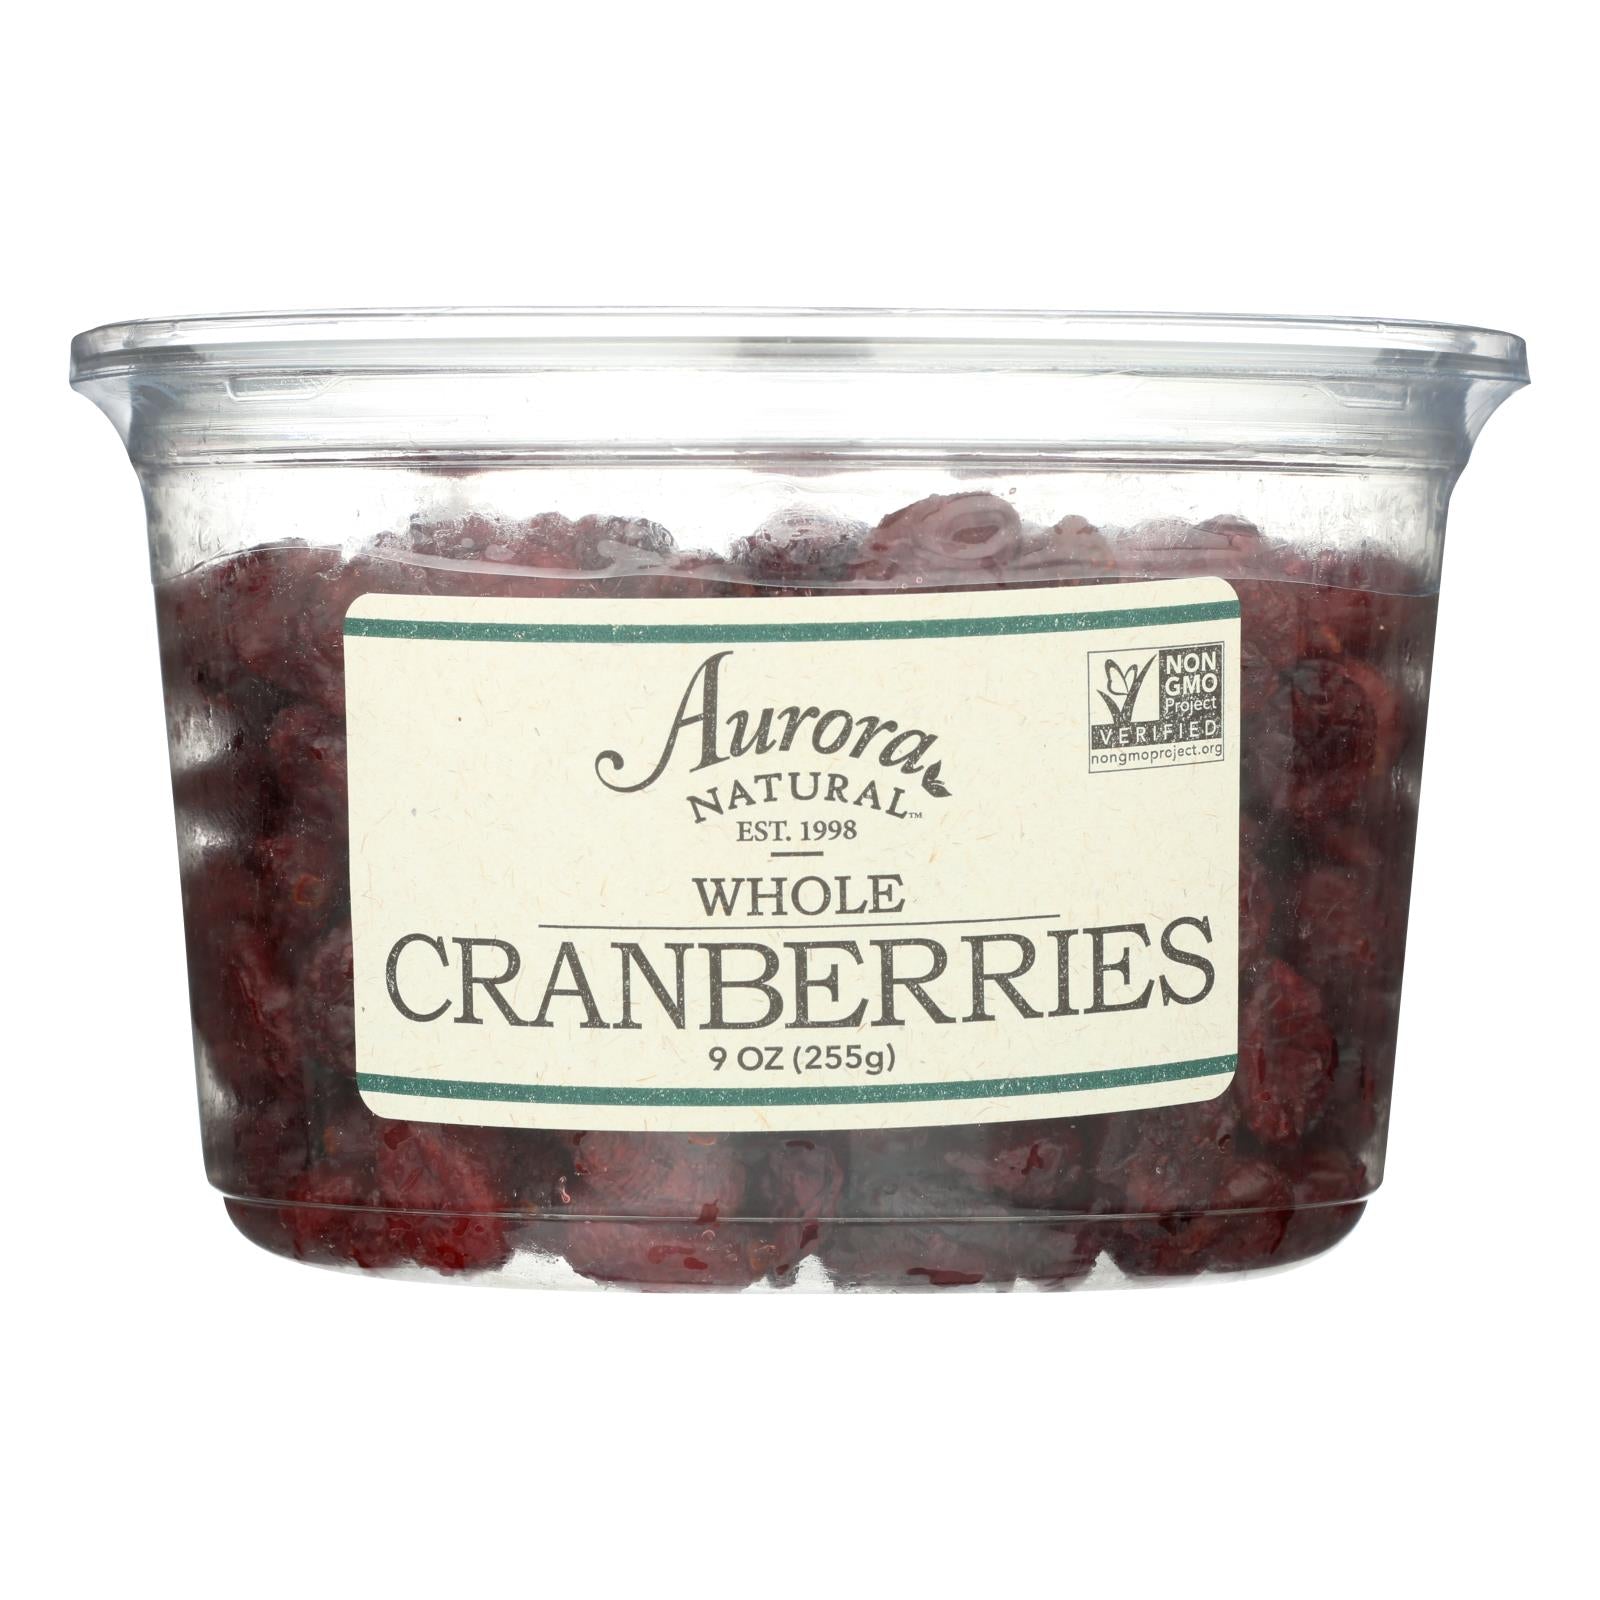 Aurora Natural Products, Aurora Natural Products - Whole Cranberries - Case of 12 - 9 oz. (Pack of 12)